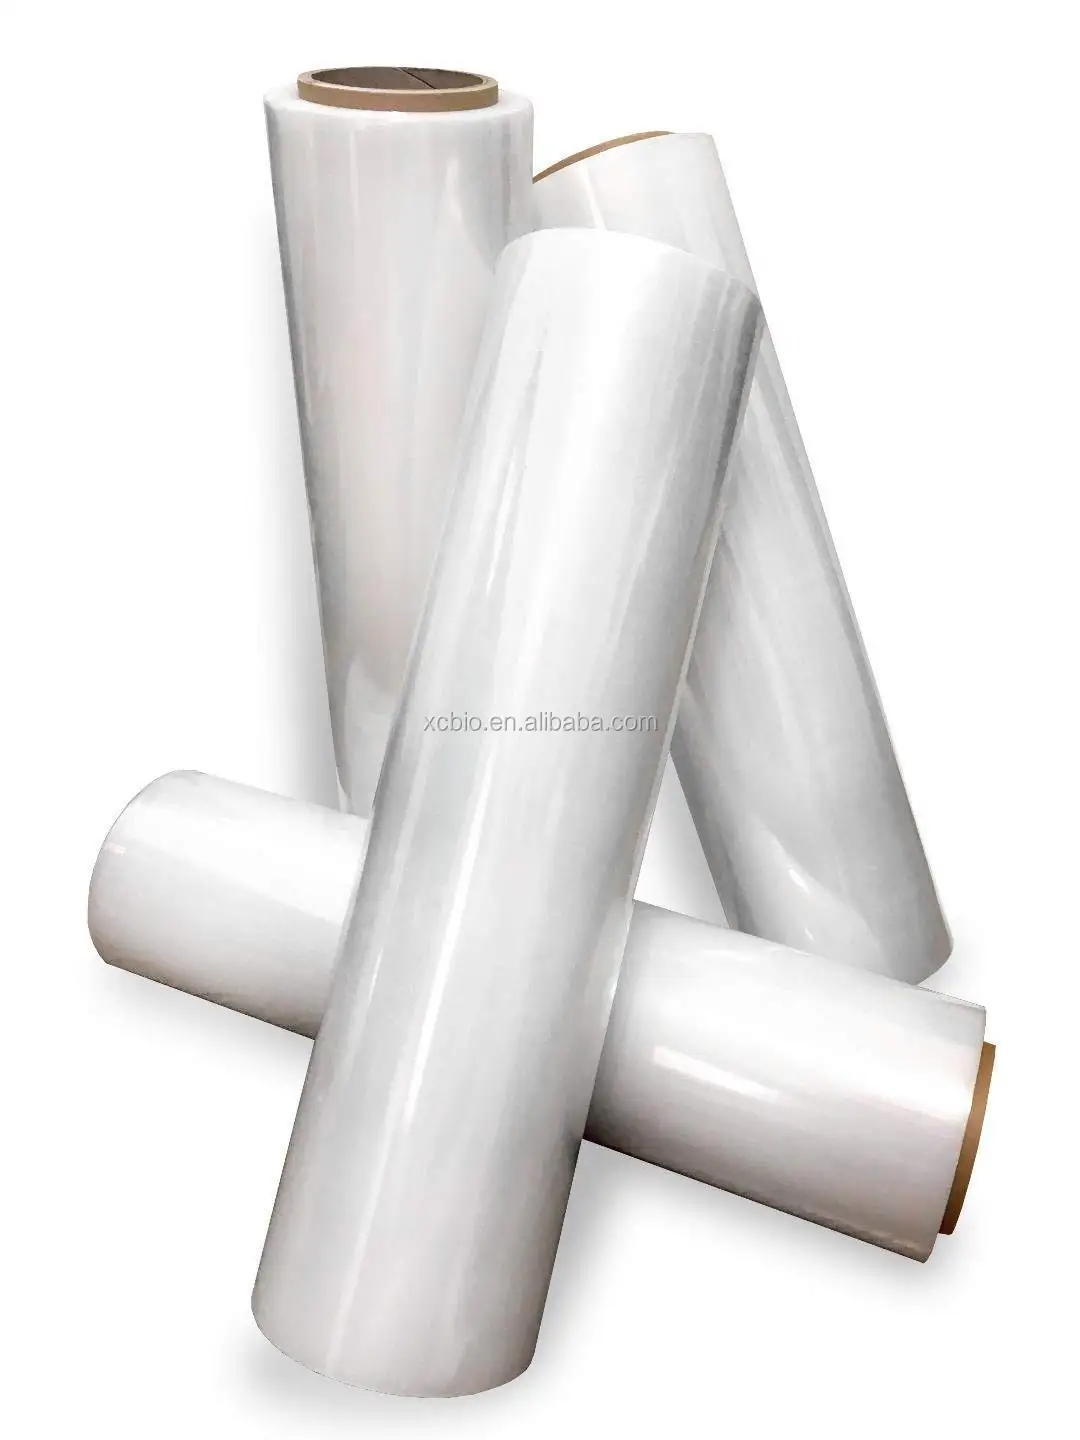 Food service plastic pla 100% biodegradable food packaging fresh wrap cling film